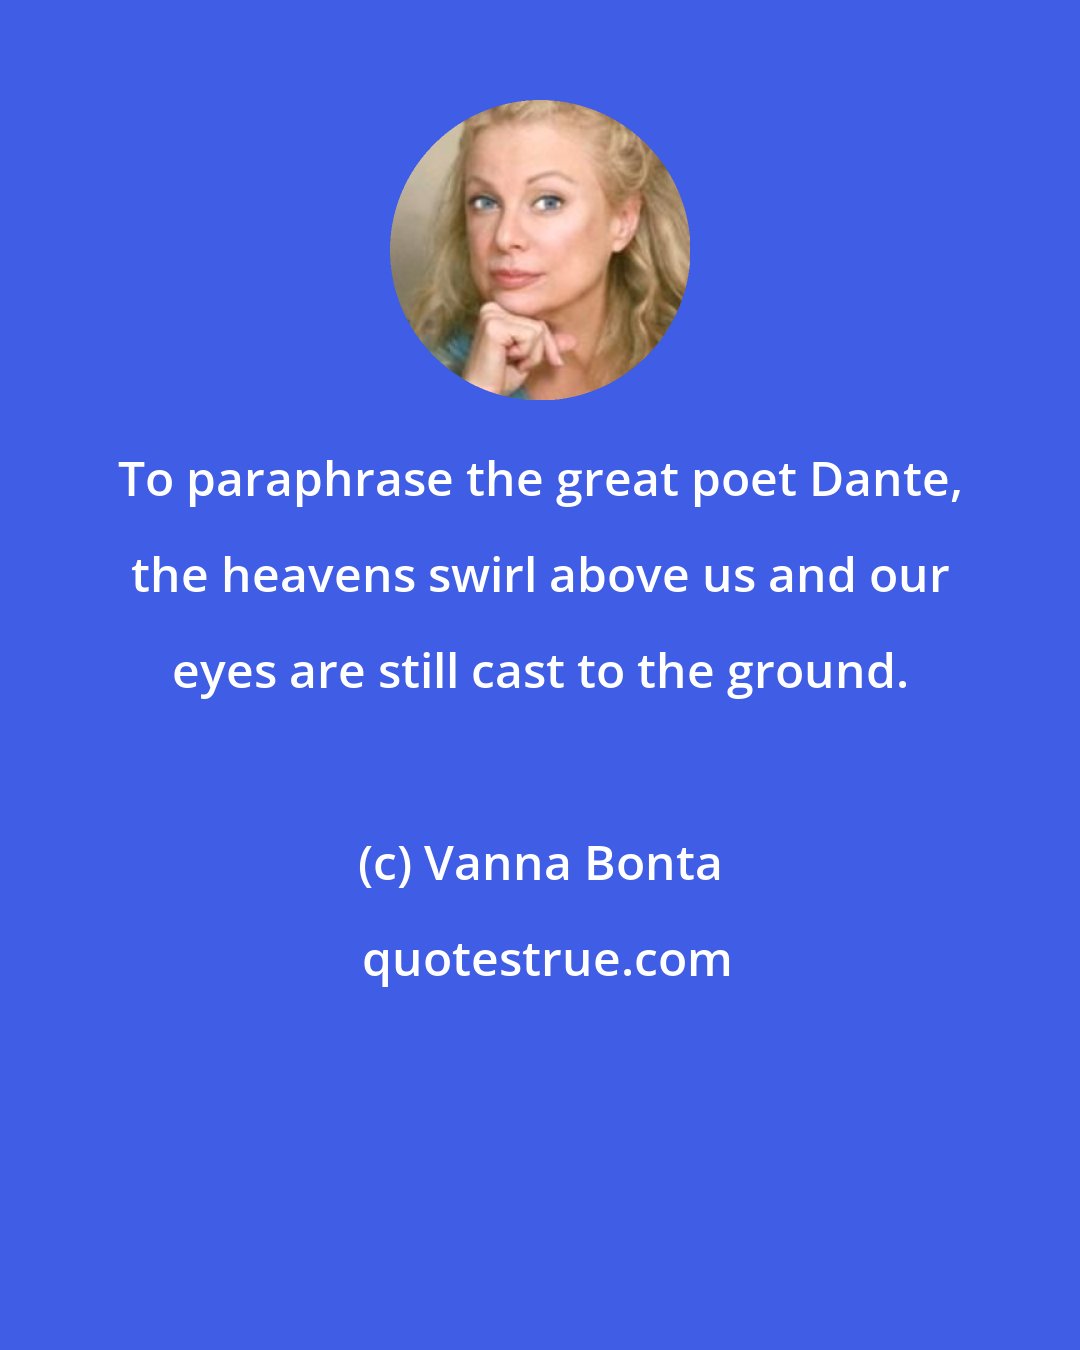 Vanna Bonta: To paraphrase the great poet Dante, the heavens swirl above us and our eyes are still cast to the ground.